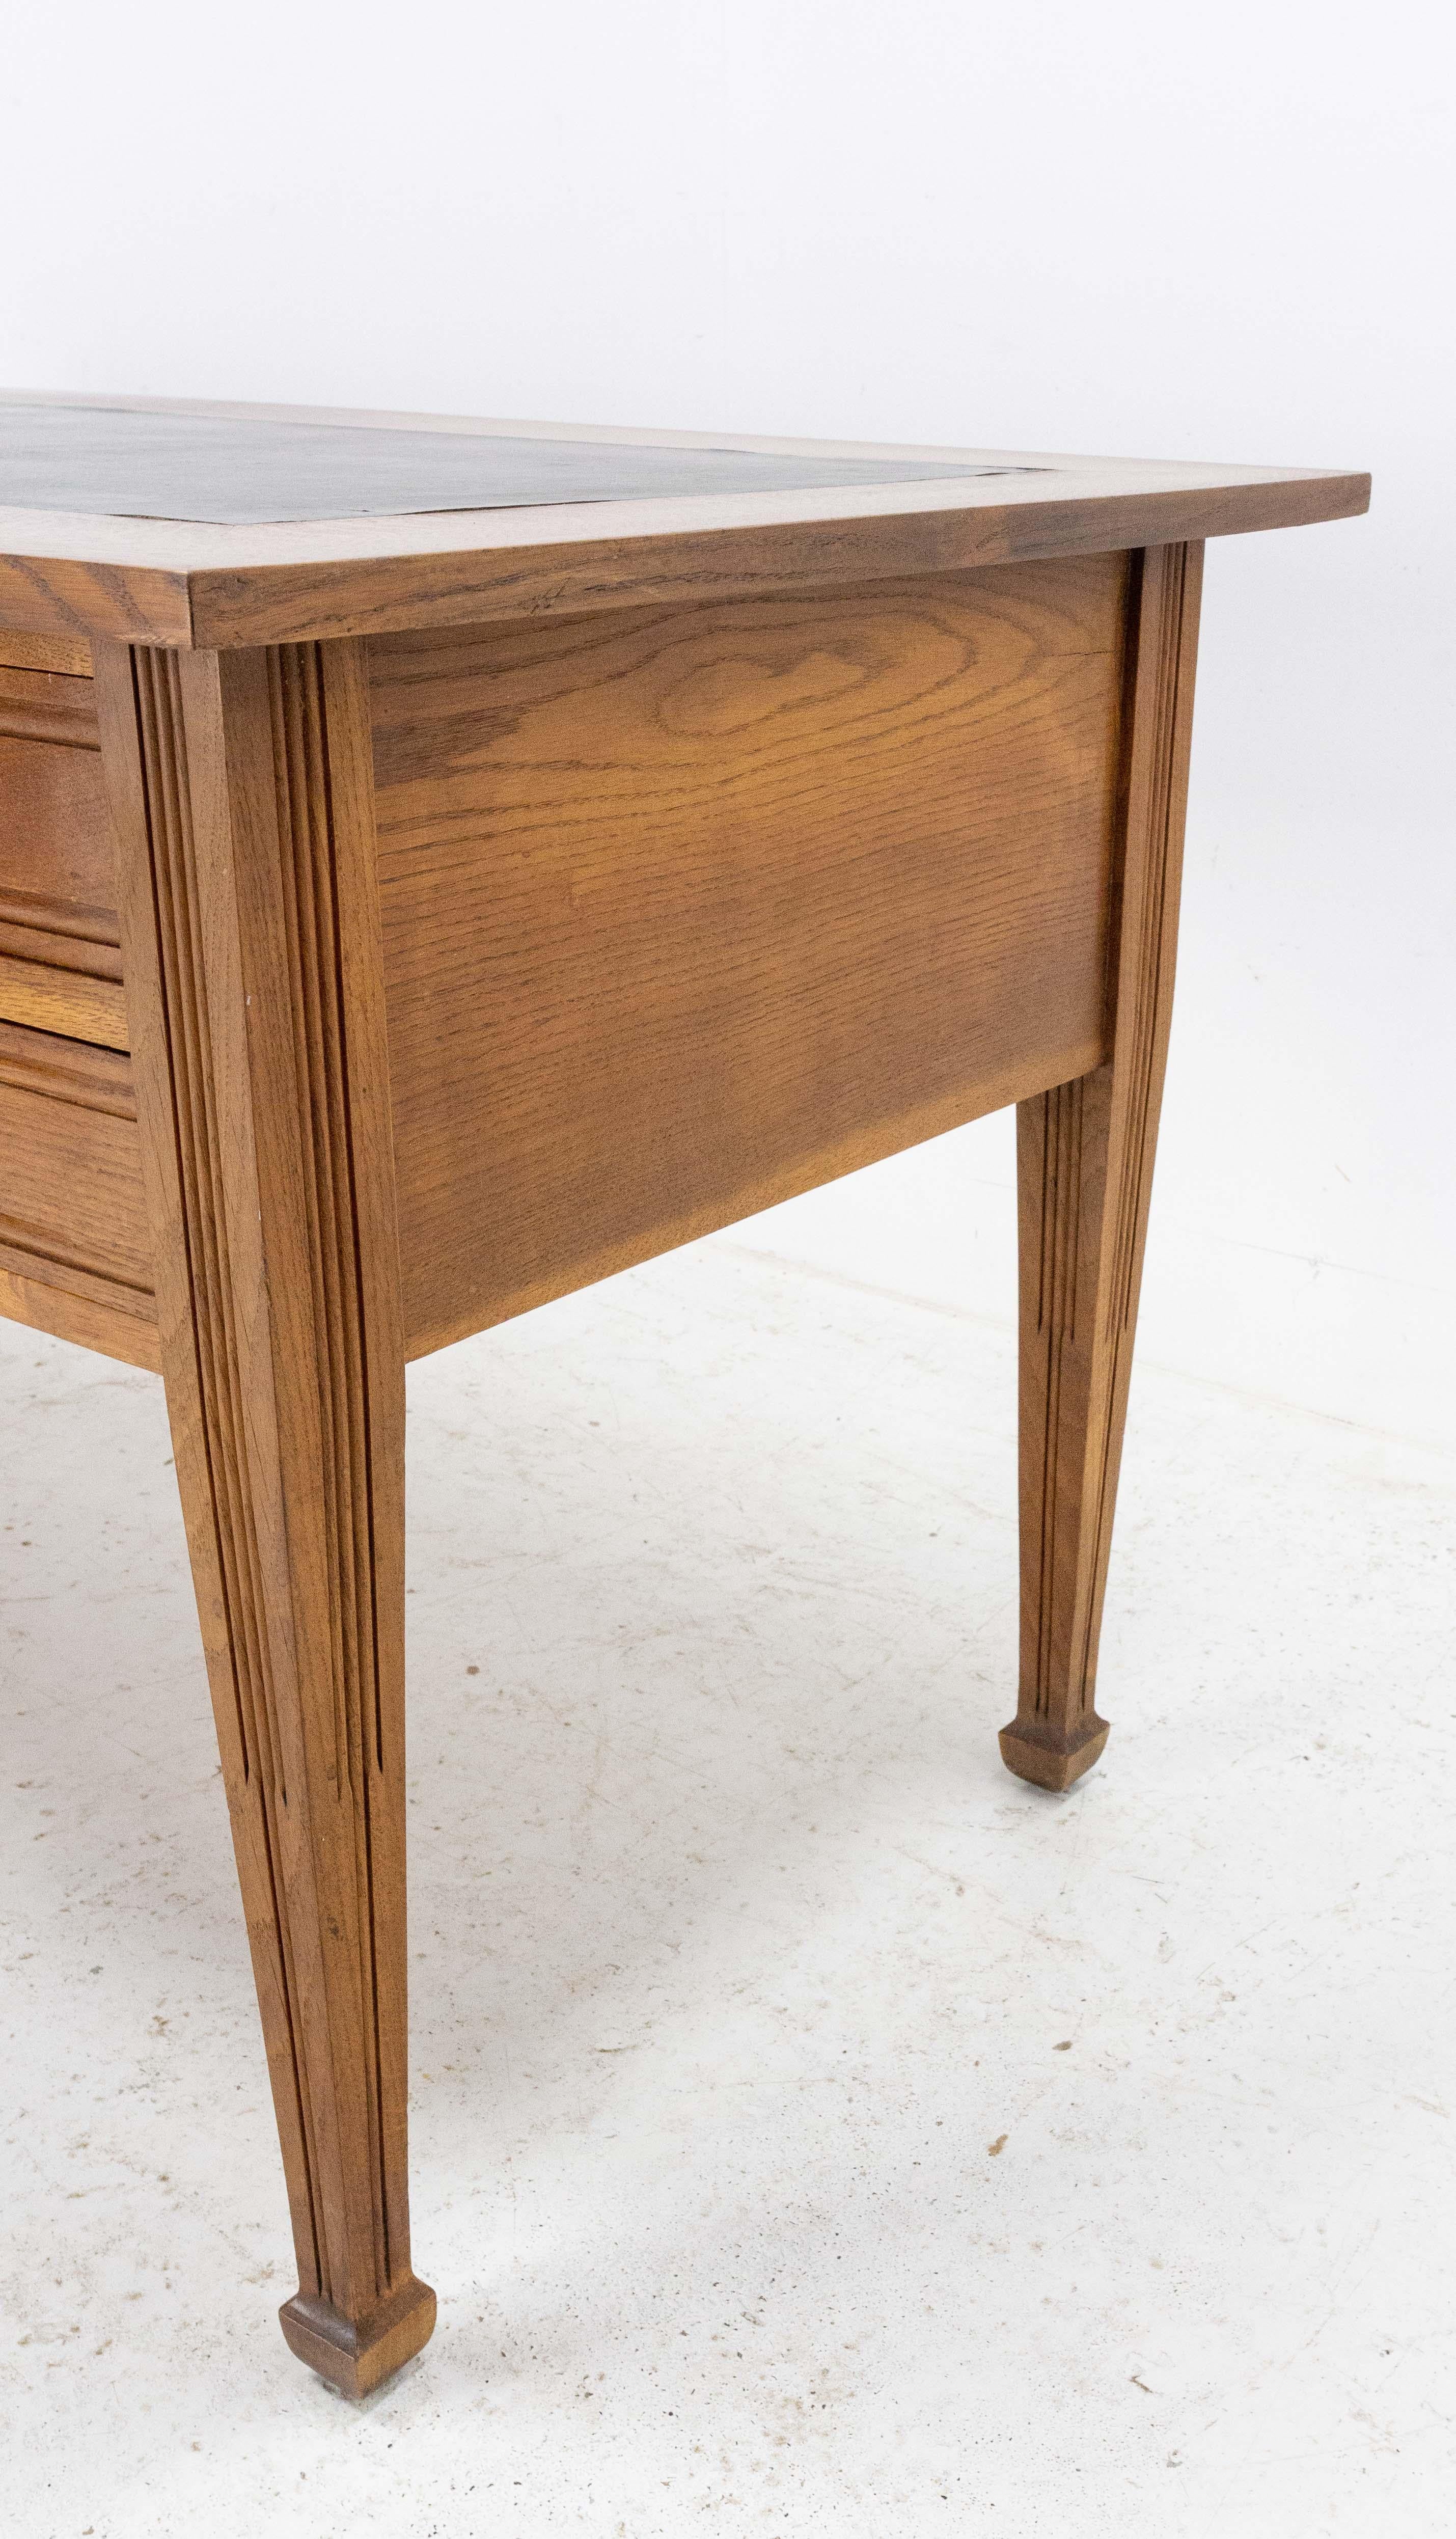 Mid-20th Century French Oak Desk Five Drawers Midcentury